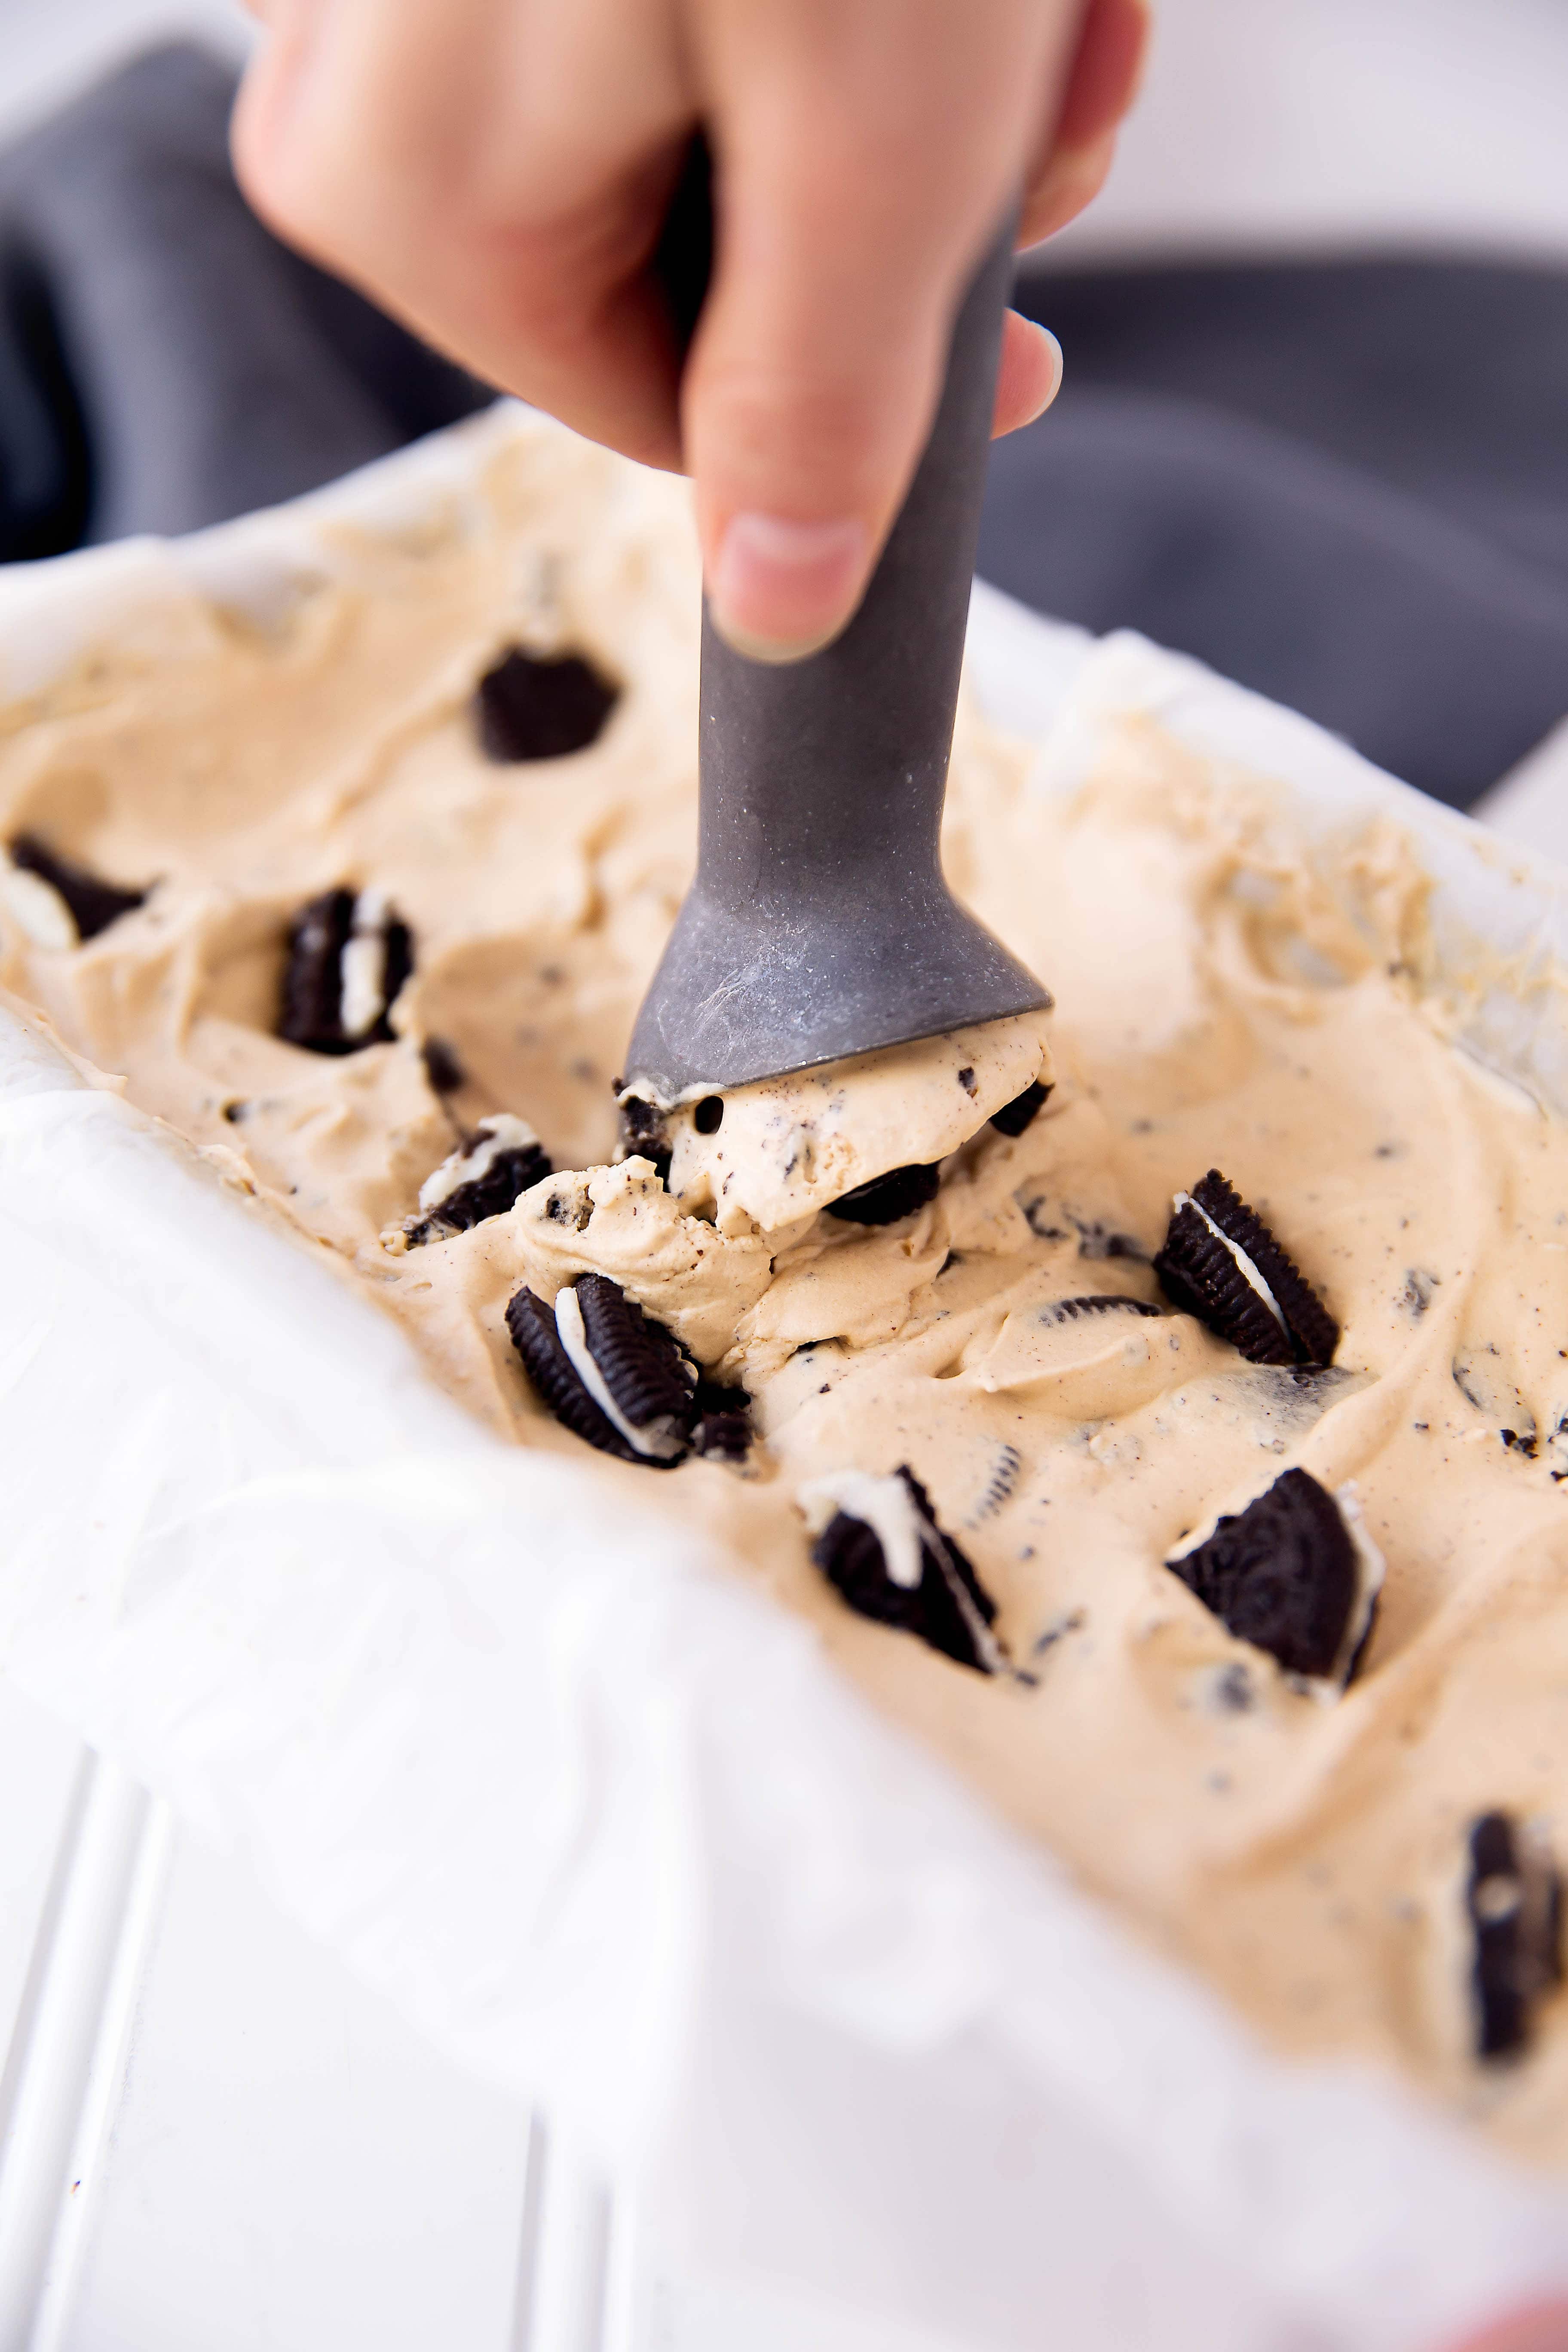 So creamy and delicious, it's almost too good to be true: less than 10 minutes and it's into the freezer for this stellar Coffee Oreo Ice Cream.